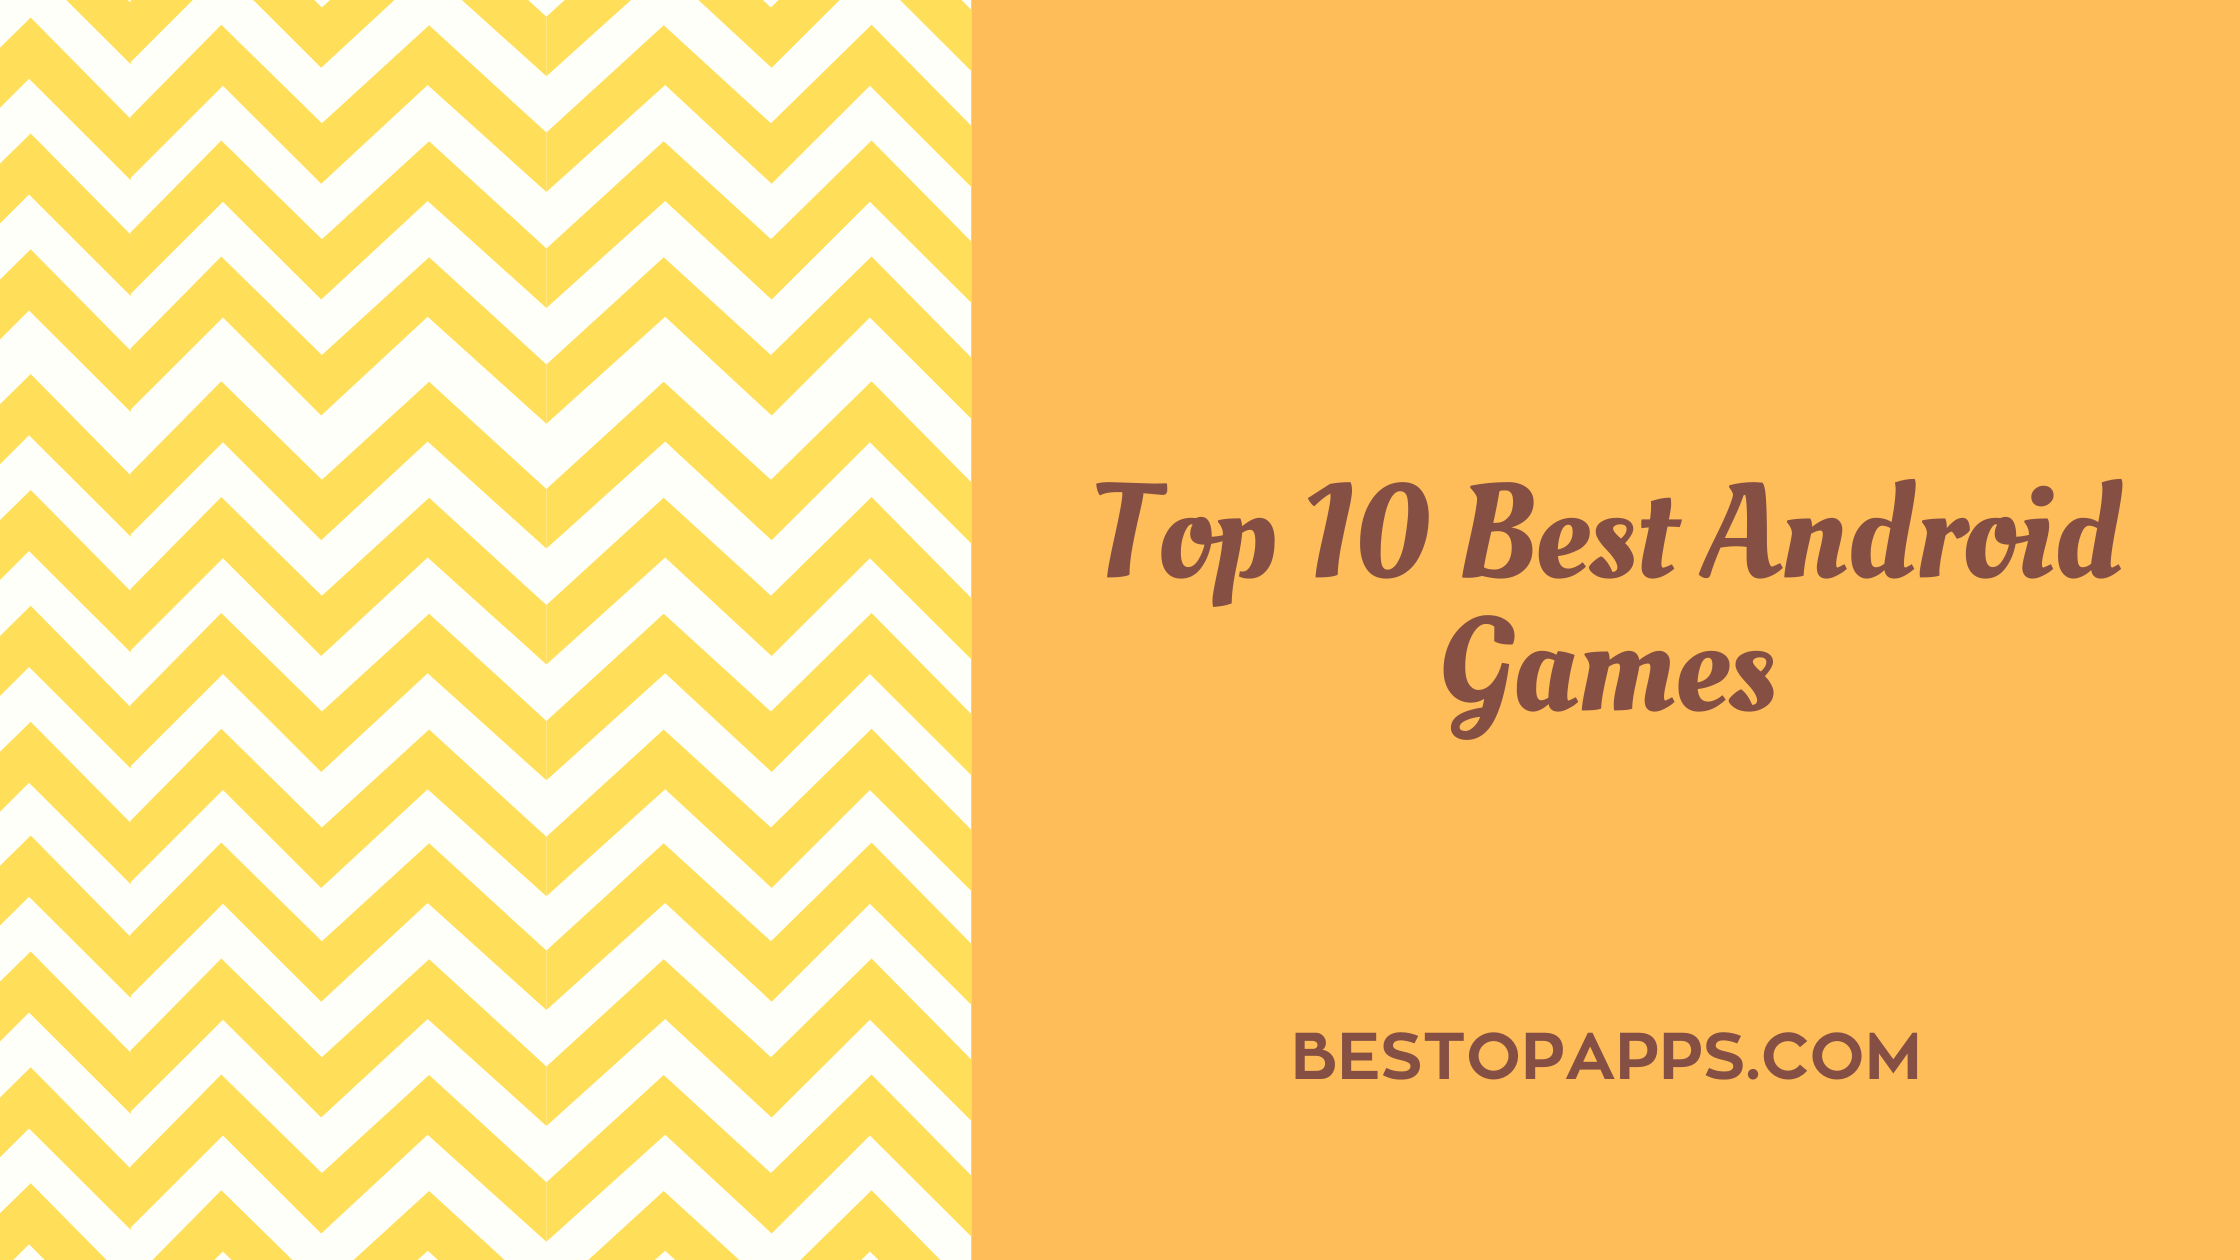 Top 10 Best Android Games